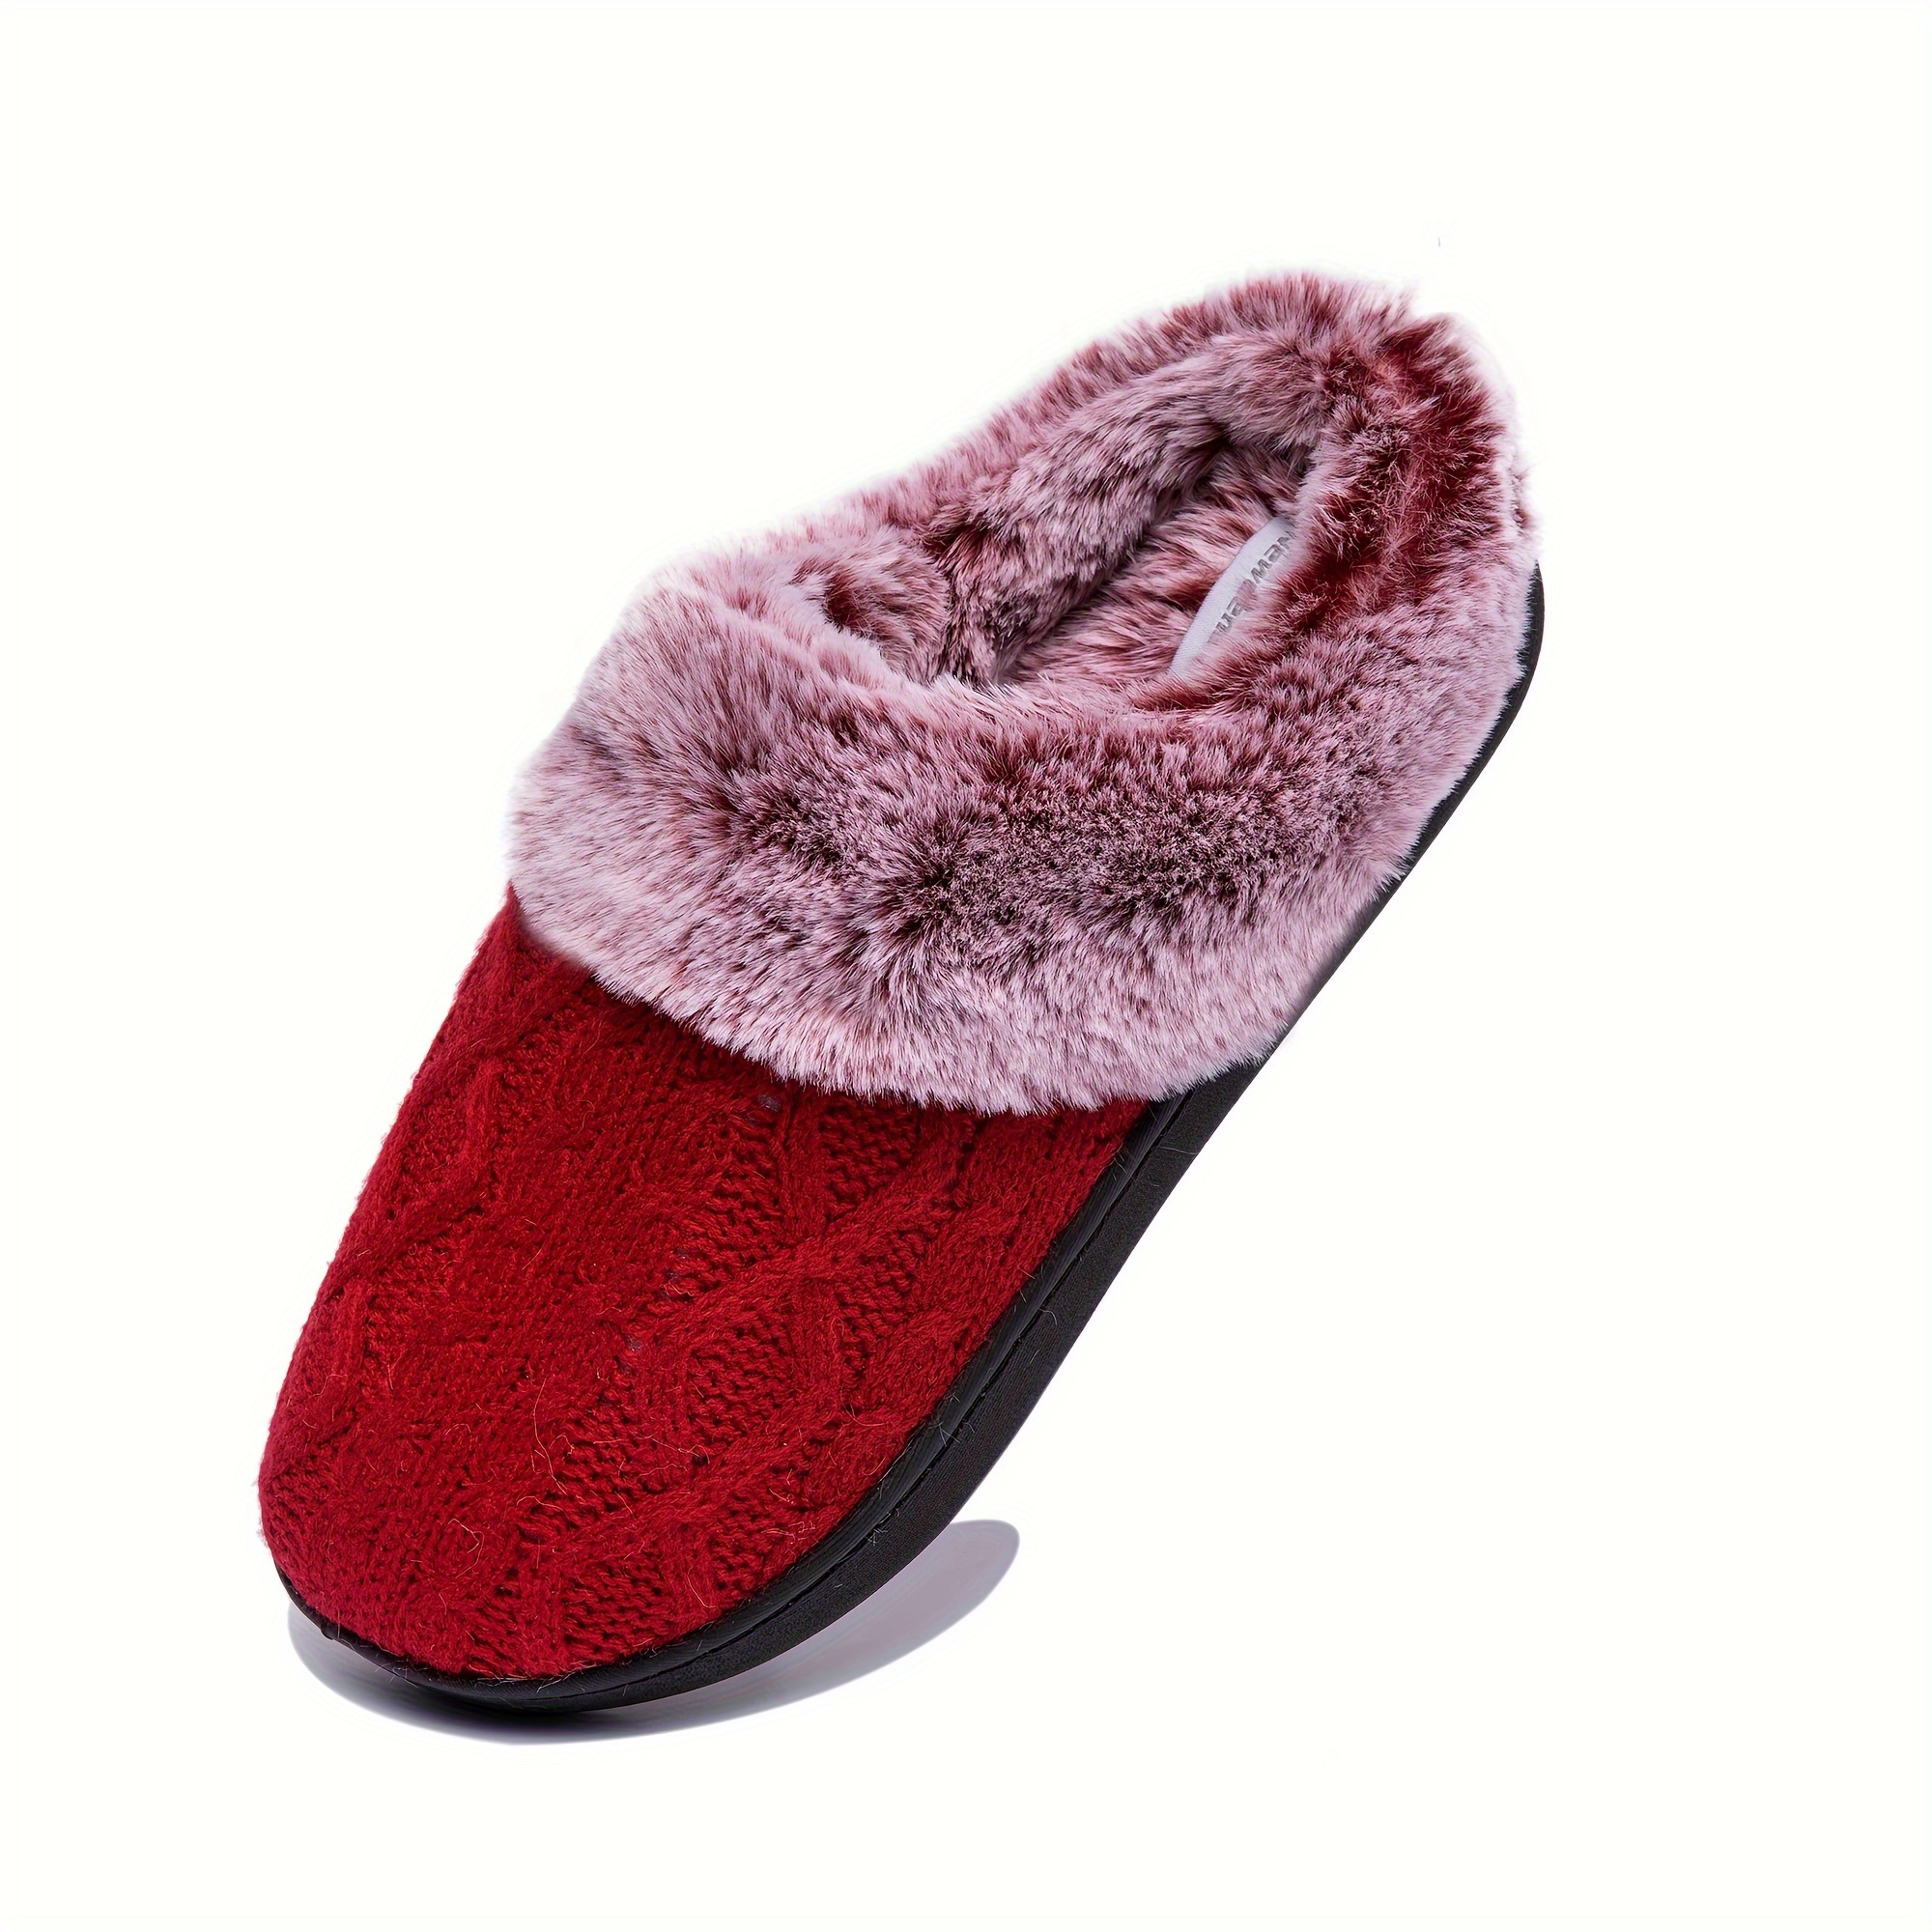 home slippers winter furry plush lined closed toe soft sole